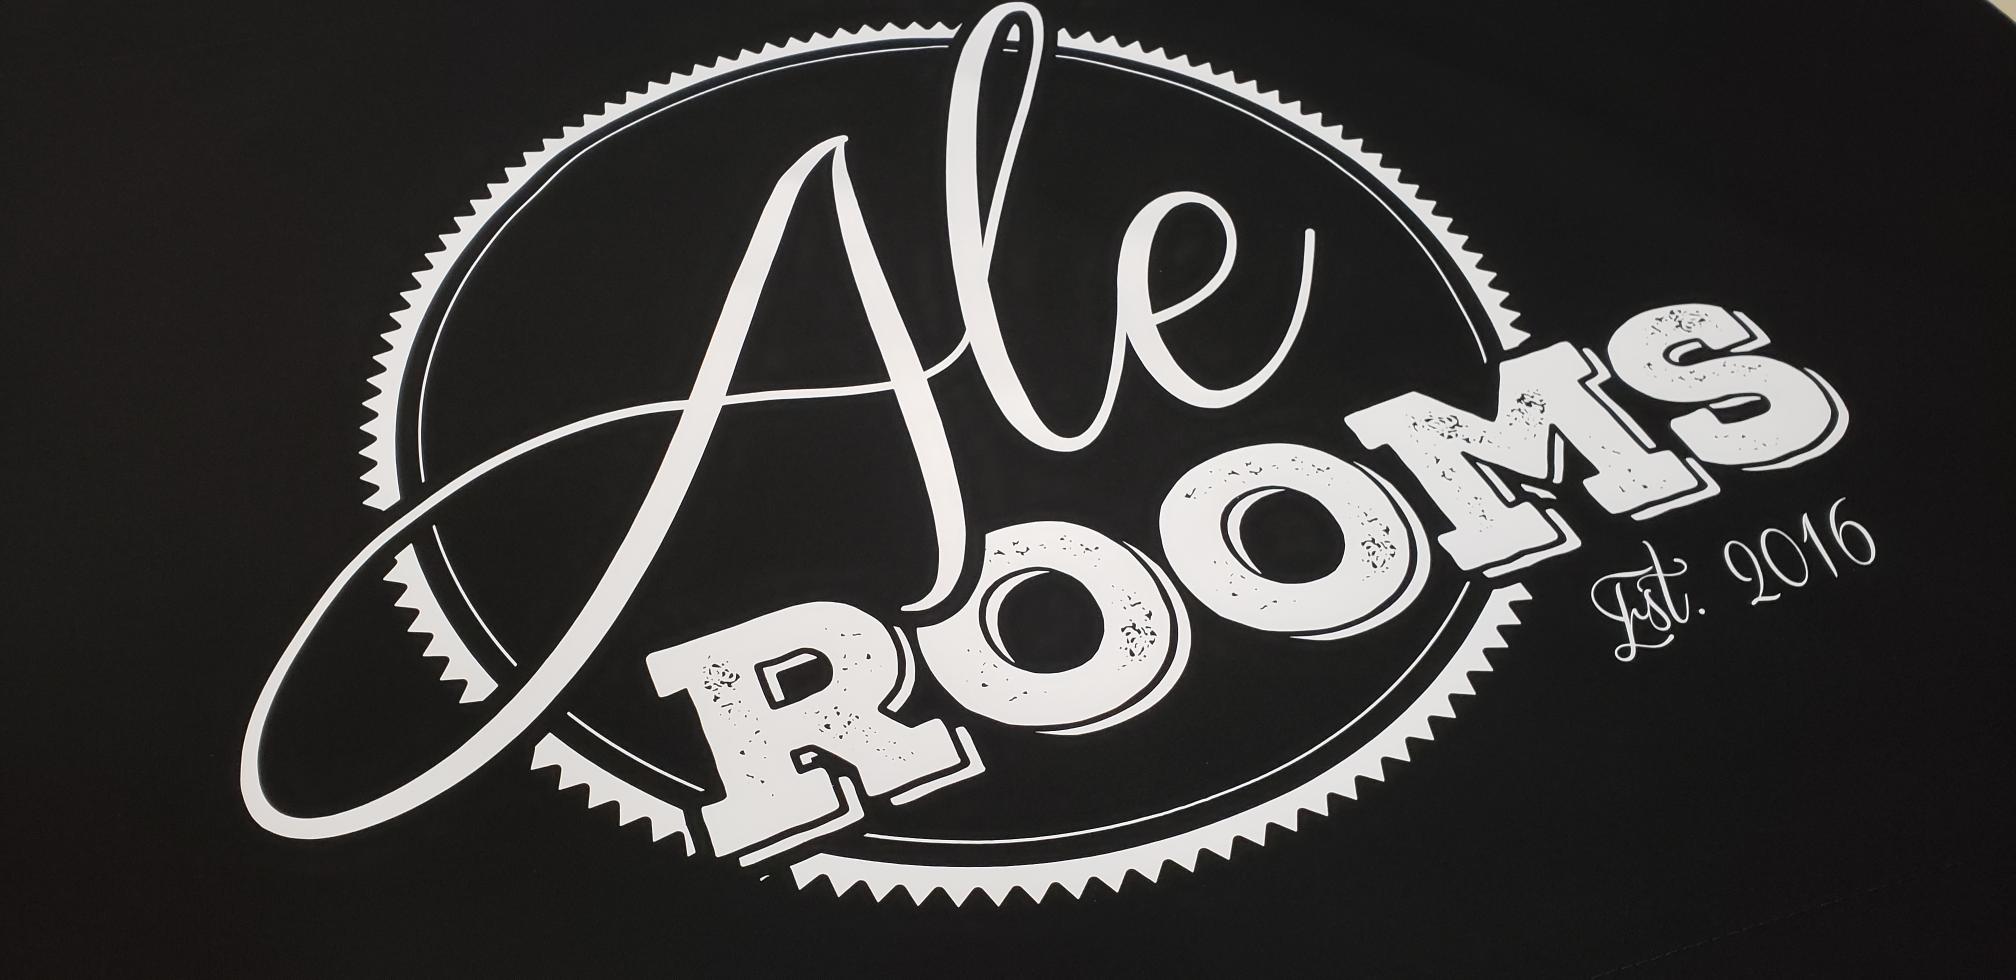 Ale Rooms - Black Canvas with a White Heat Pressed Vinyl Logo